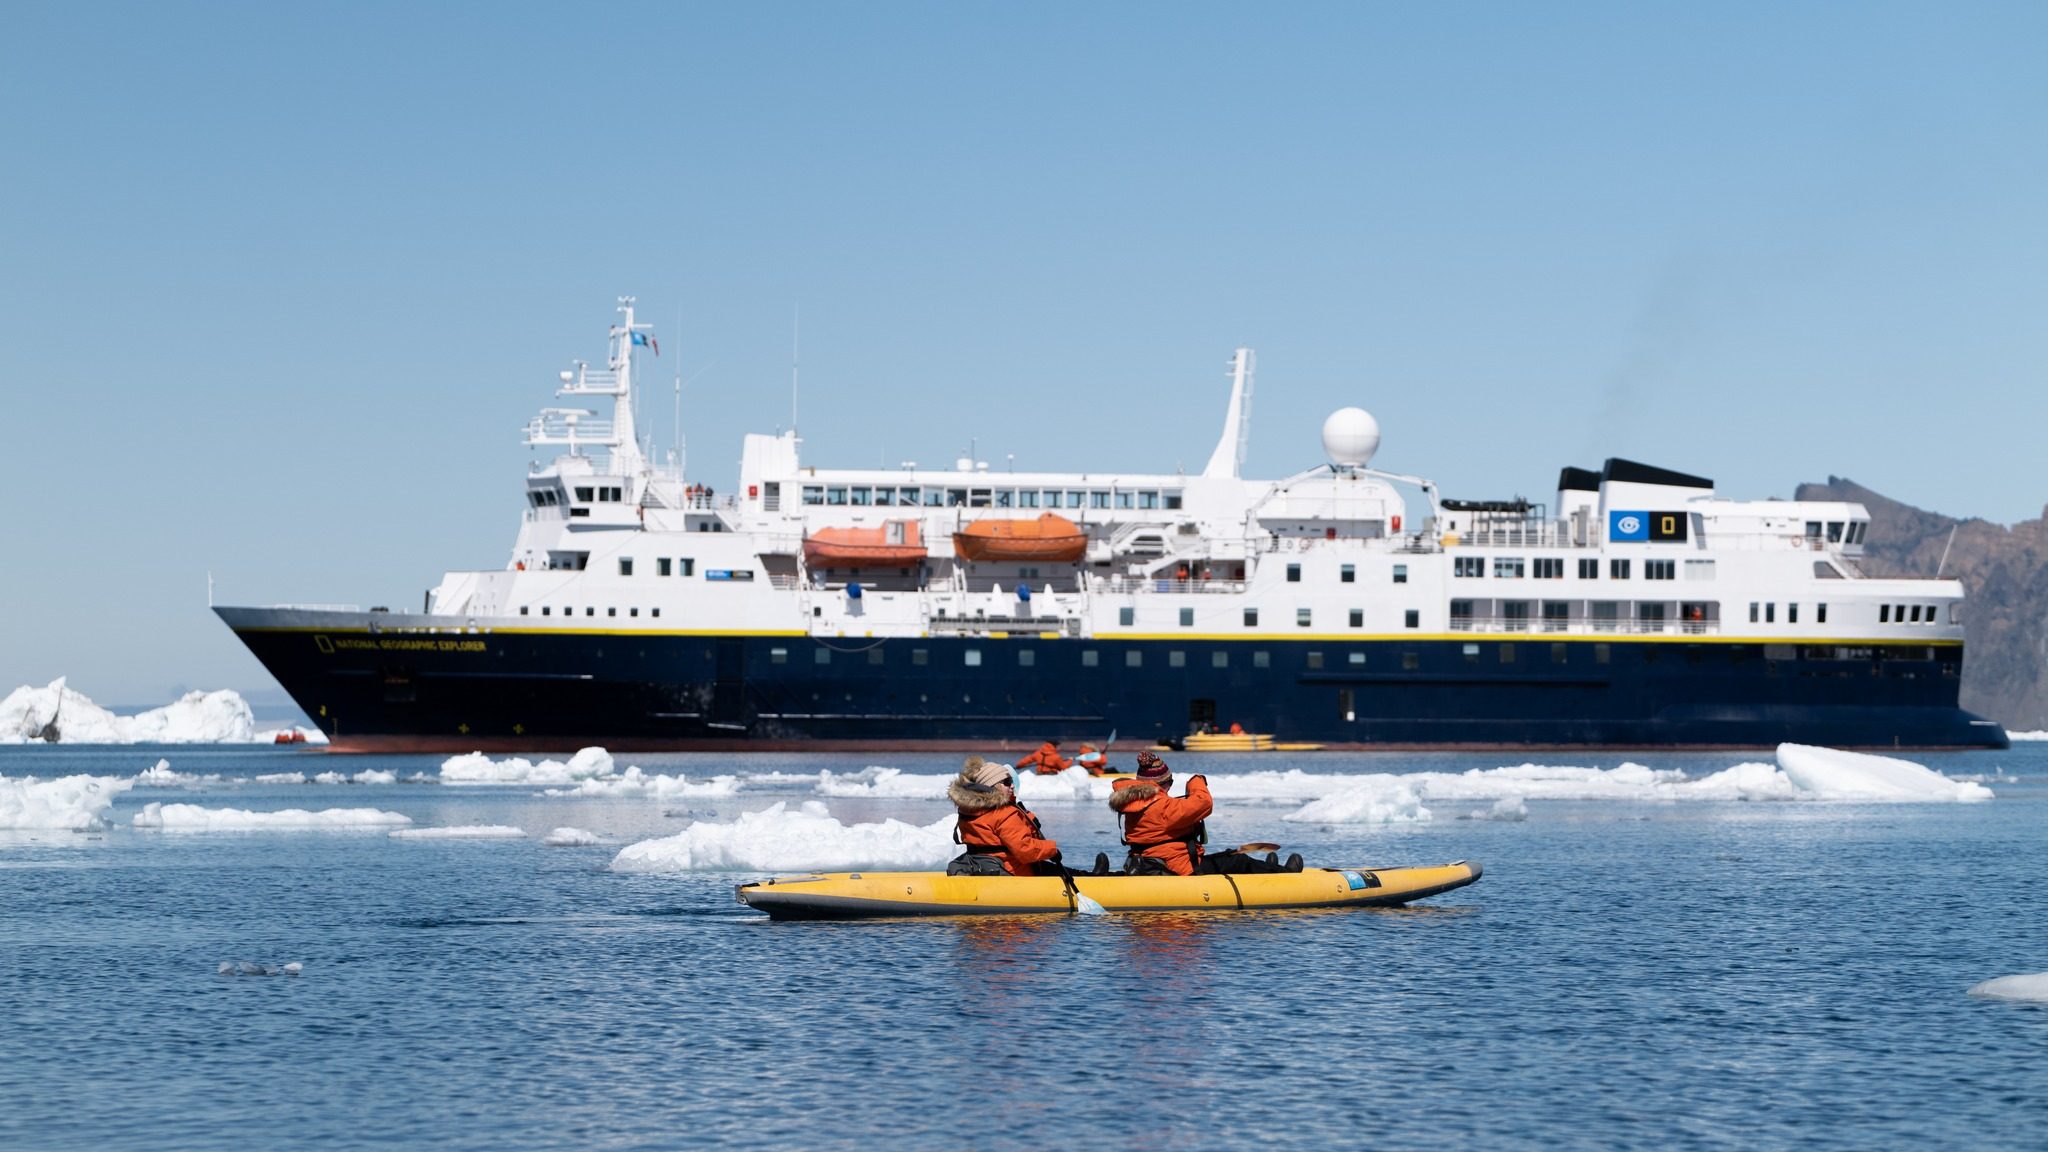 Nat Geo Explorer ship in icy sea with kayakers